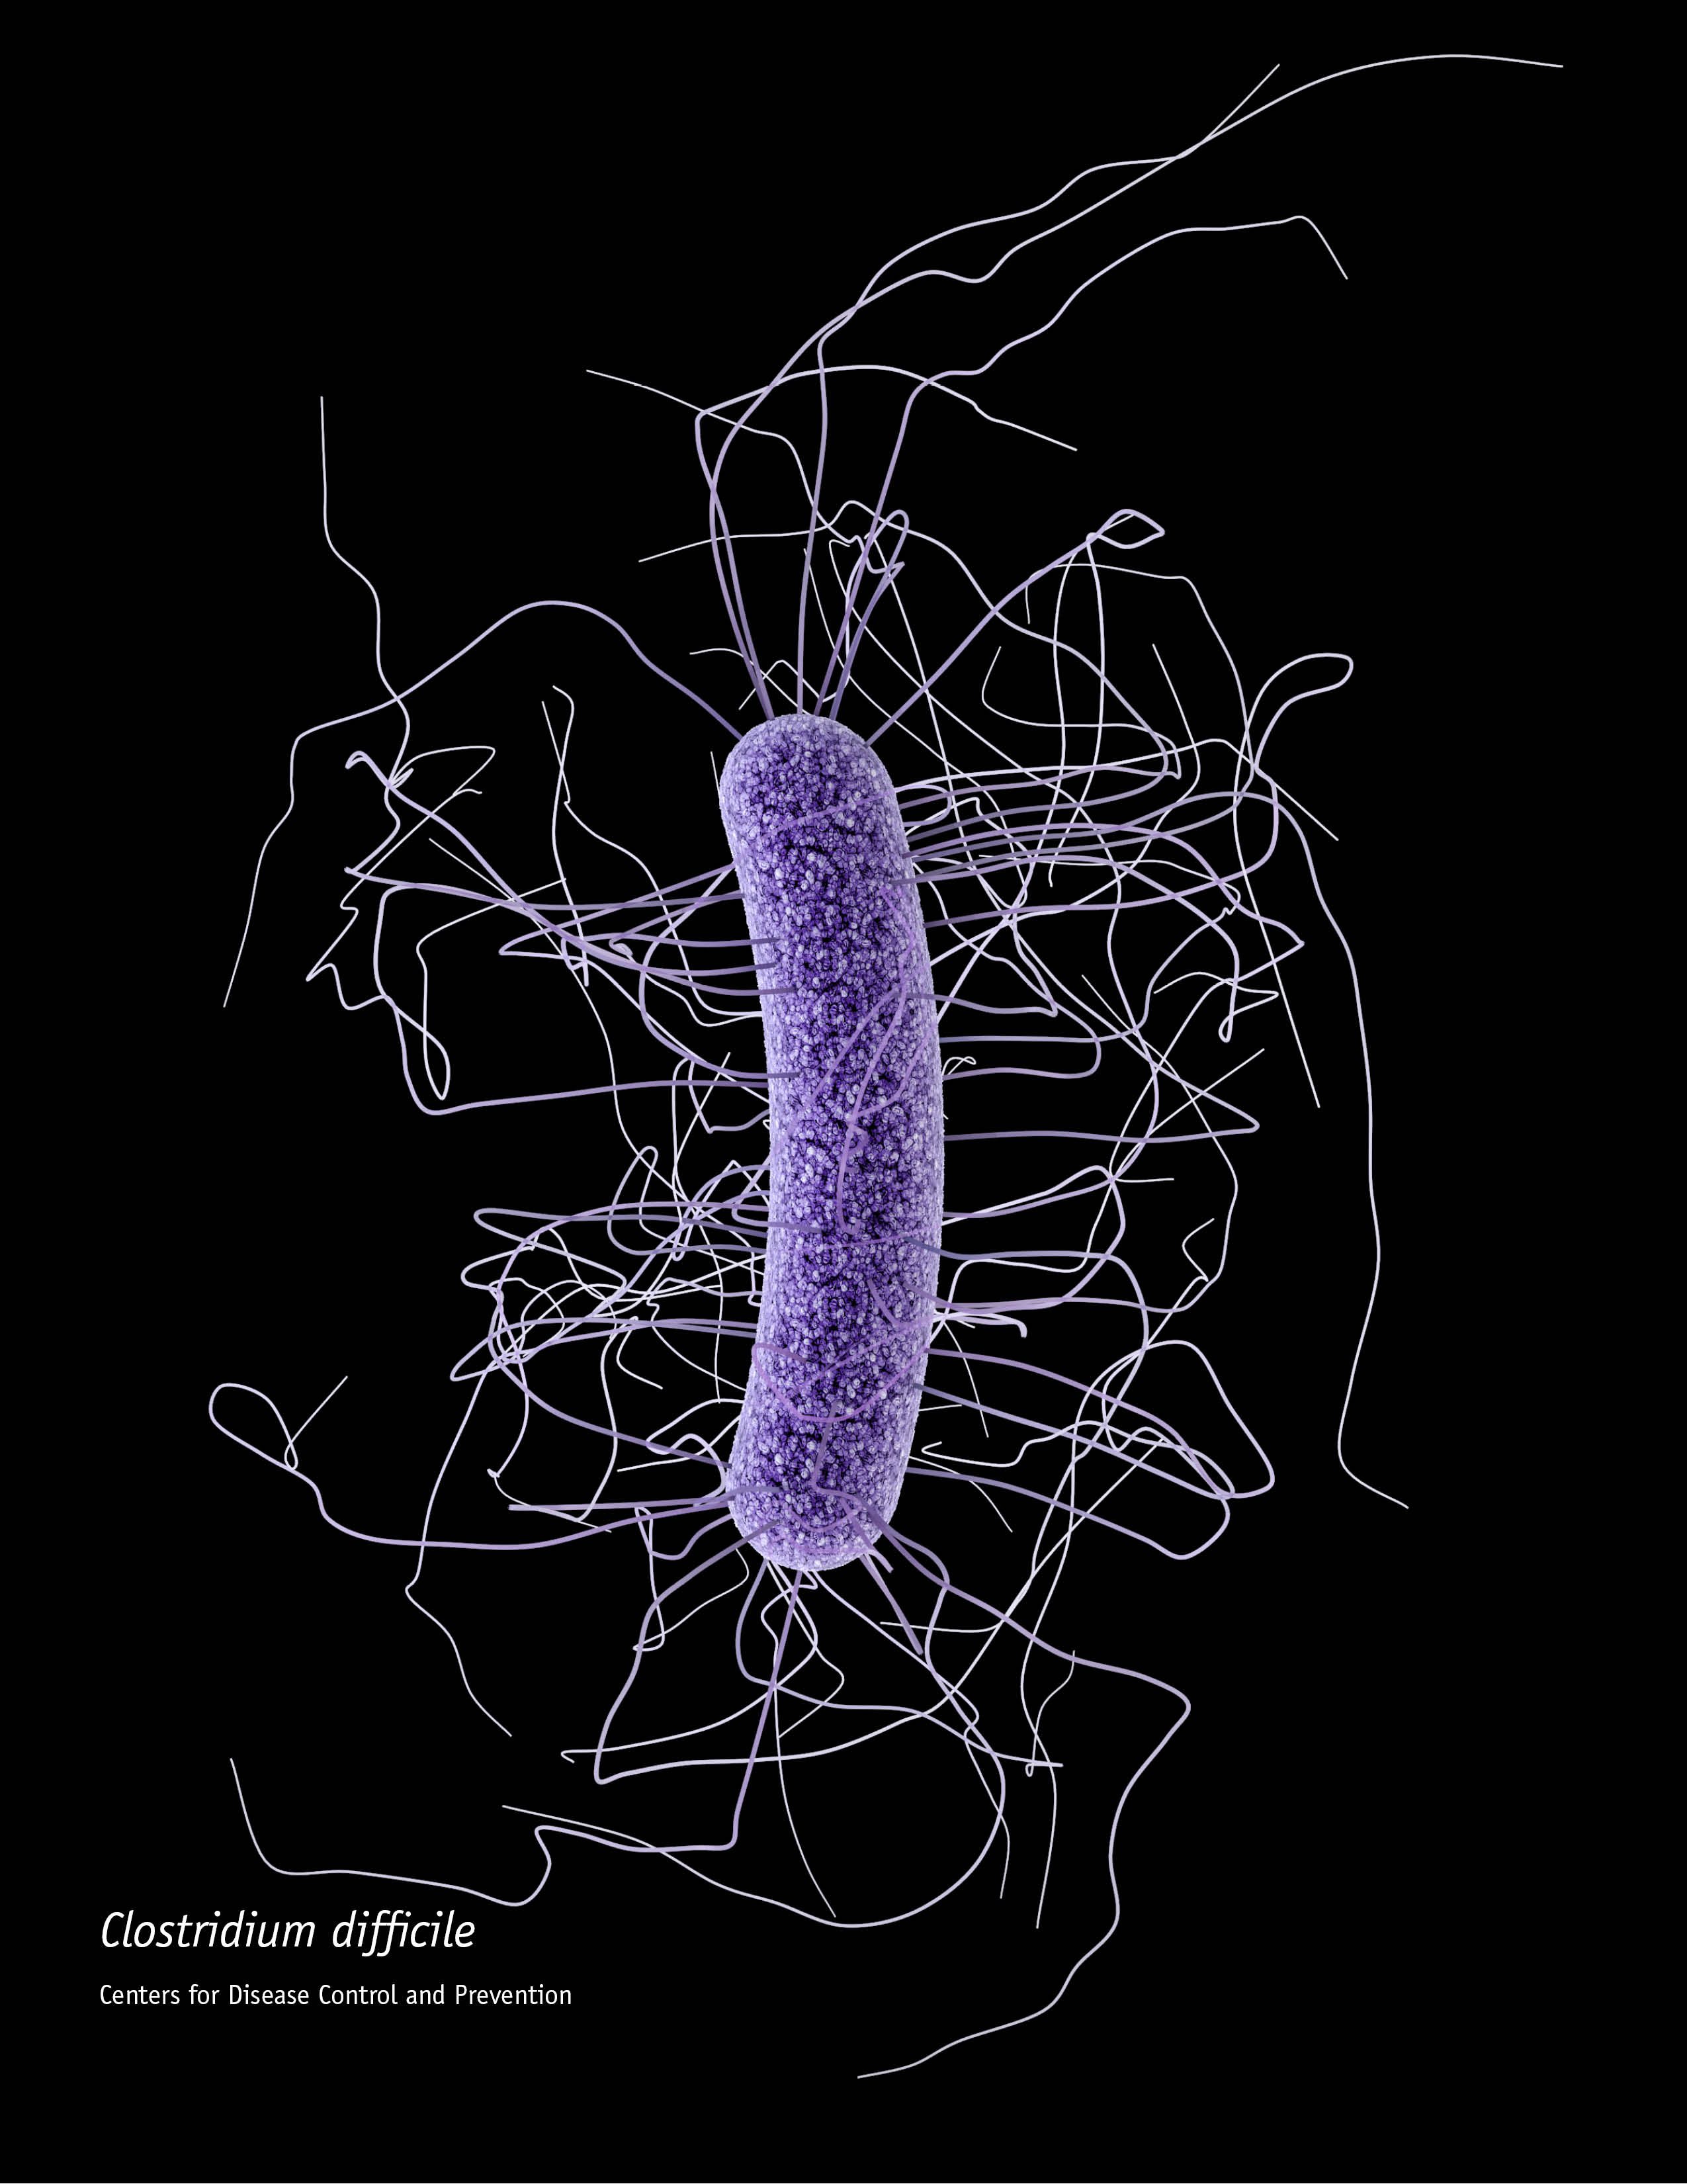 This is a 3-dimensional (3D) illustration, based on photomicrographic data, depicting the ultrastructural morphology exhibited by a single, gram-positive, Clostridium difficile bacillus. Image: CDC/ J. Archer